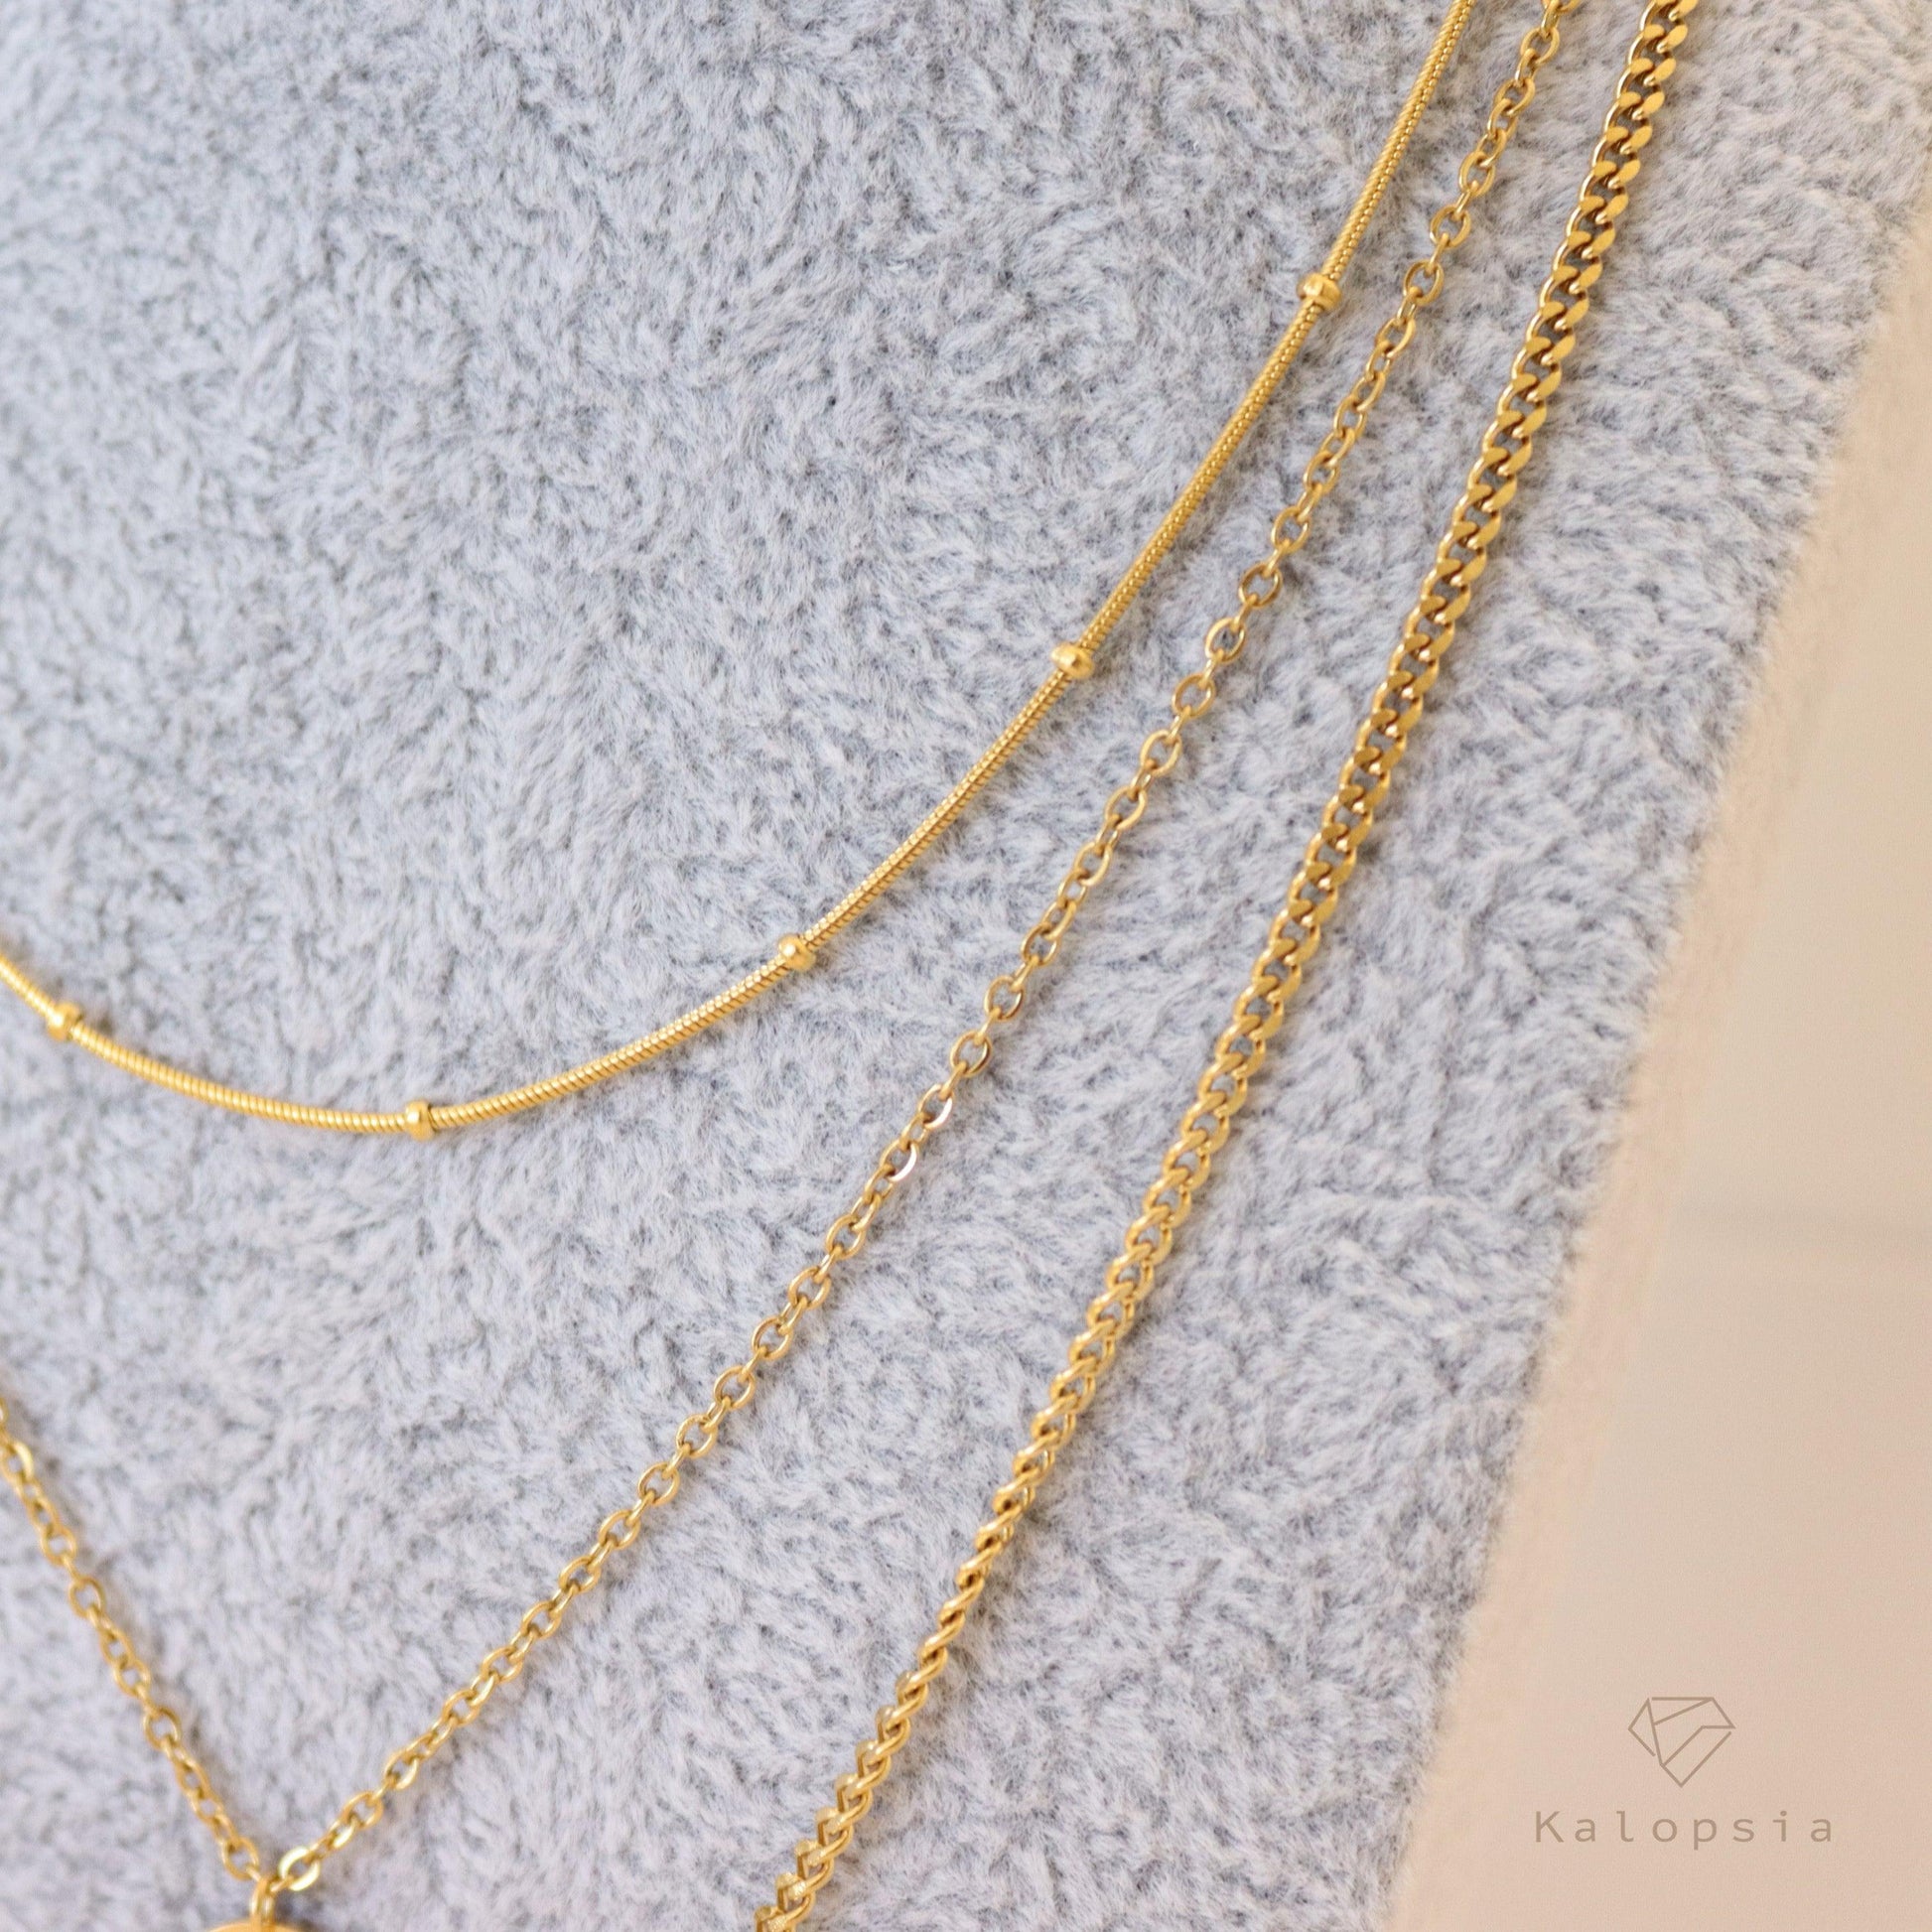 3 Layers Necklace - Kalopsia Accessories